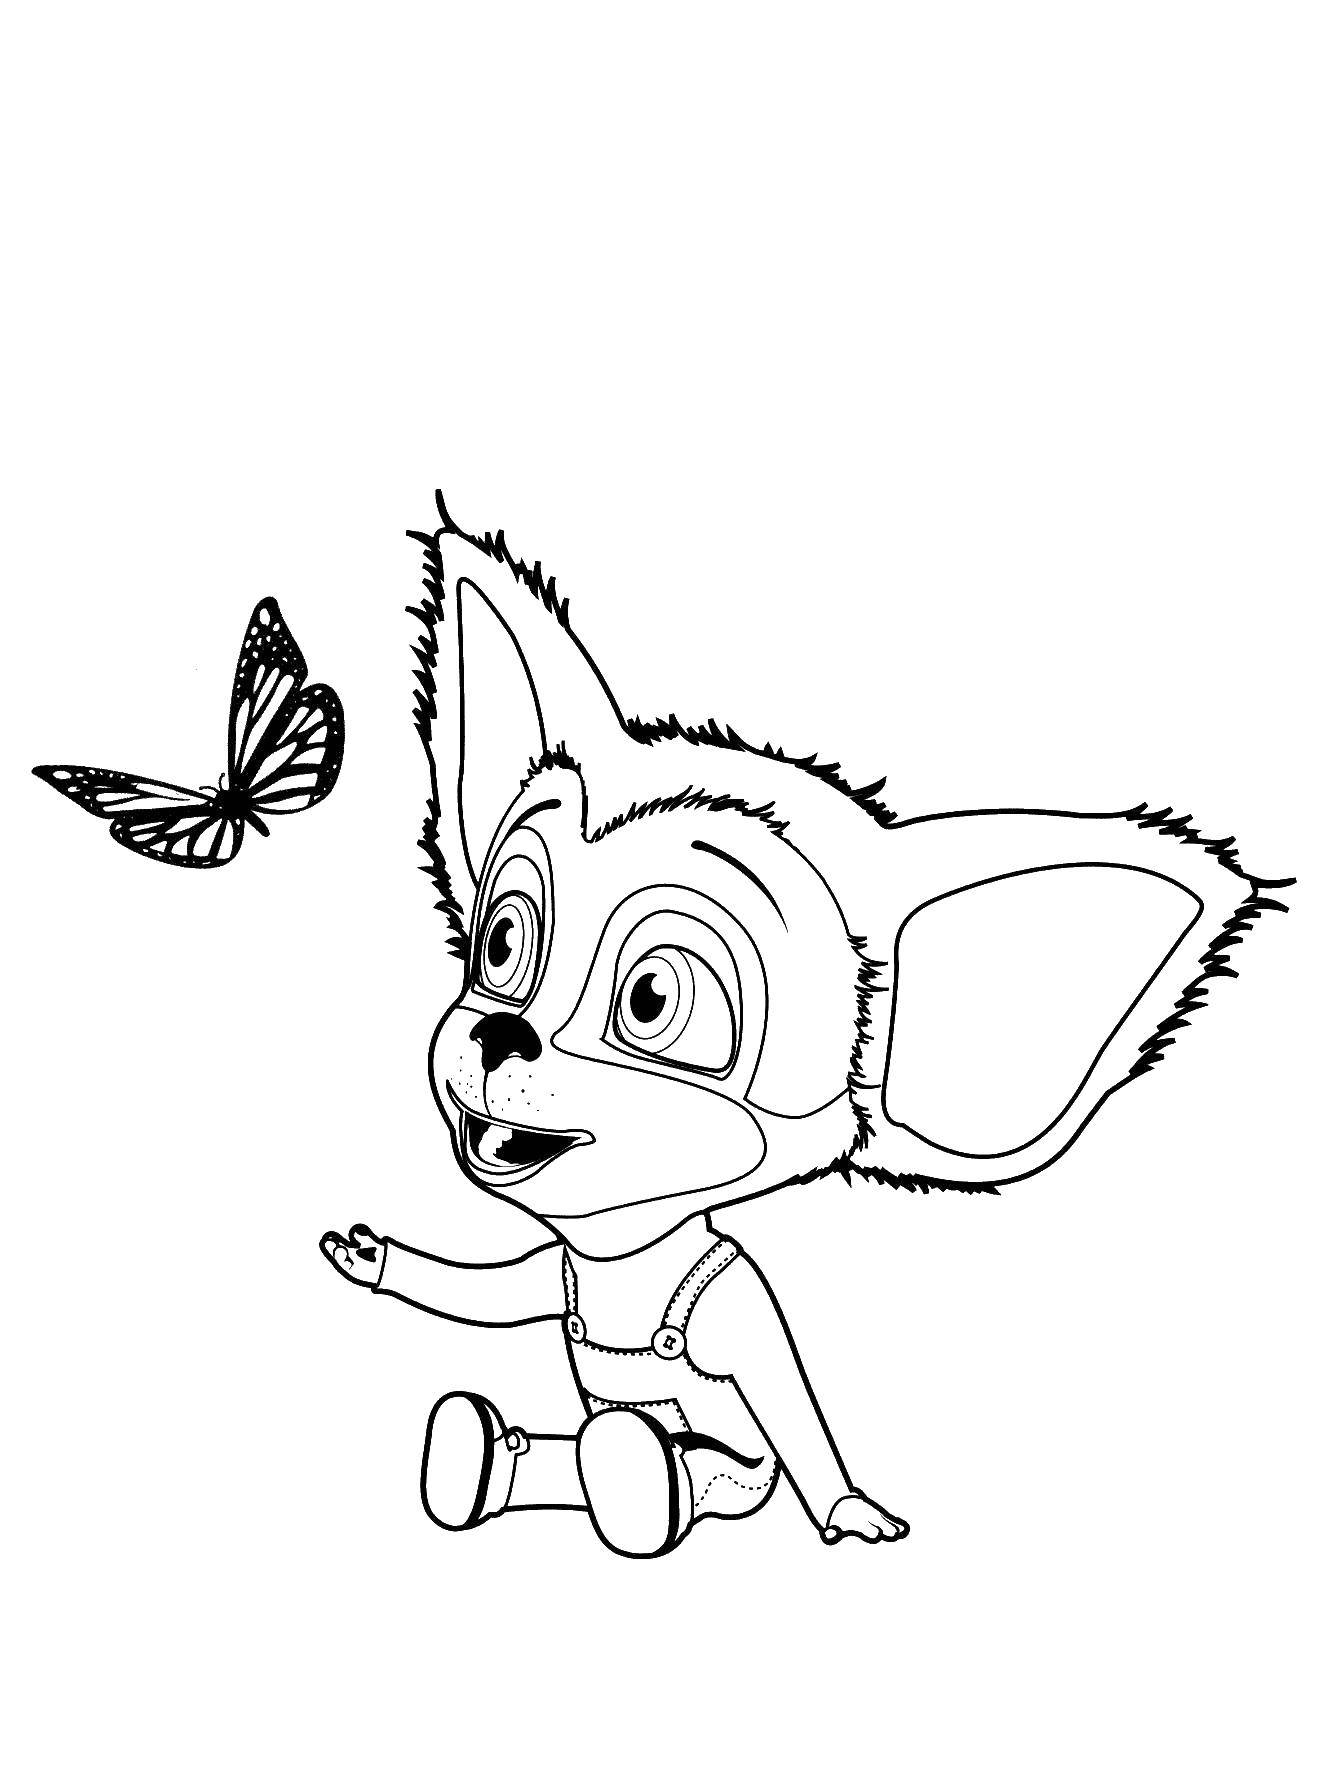 Coloring Mouse babochai. Category Animals. Tags:  animals , insects, mouse, butterfly.